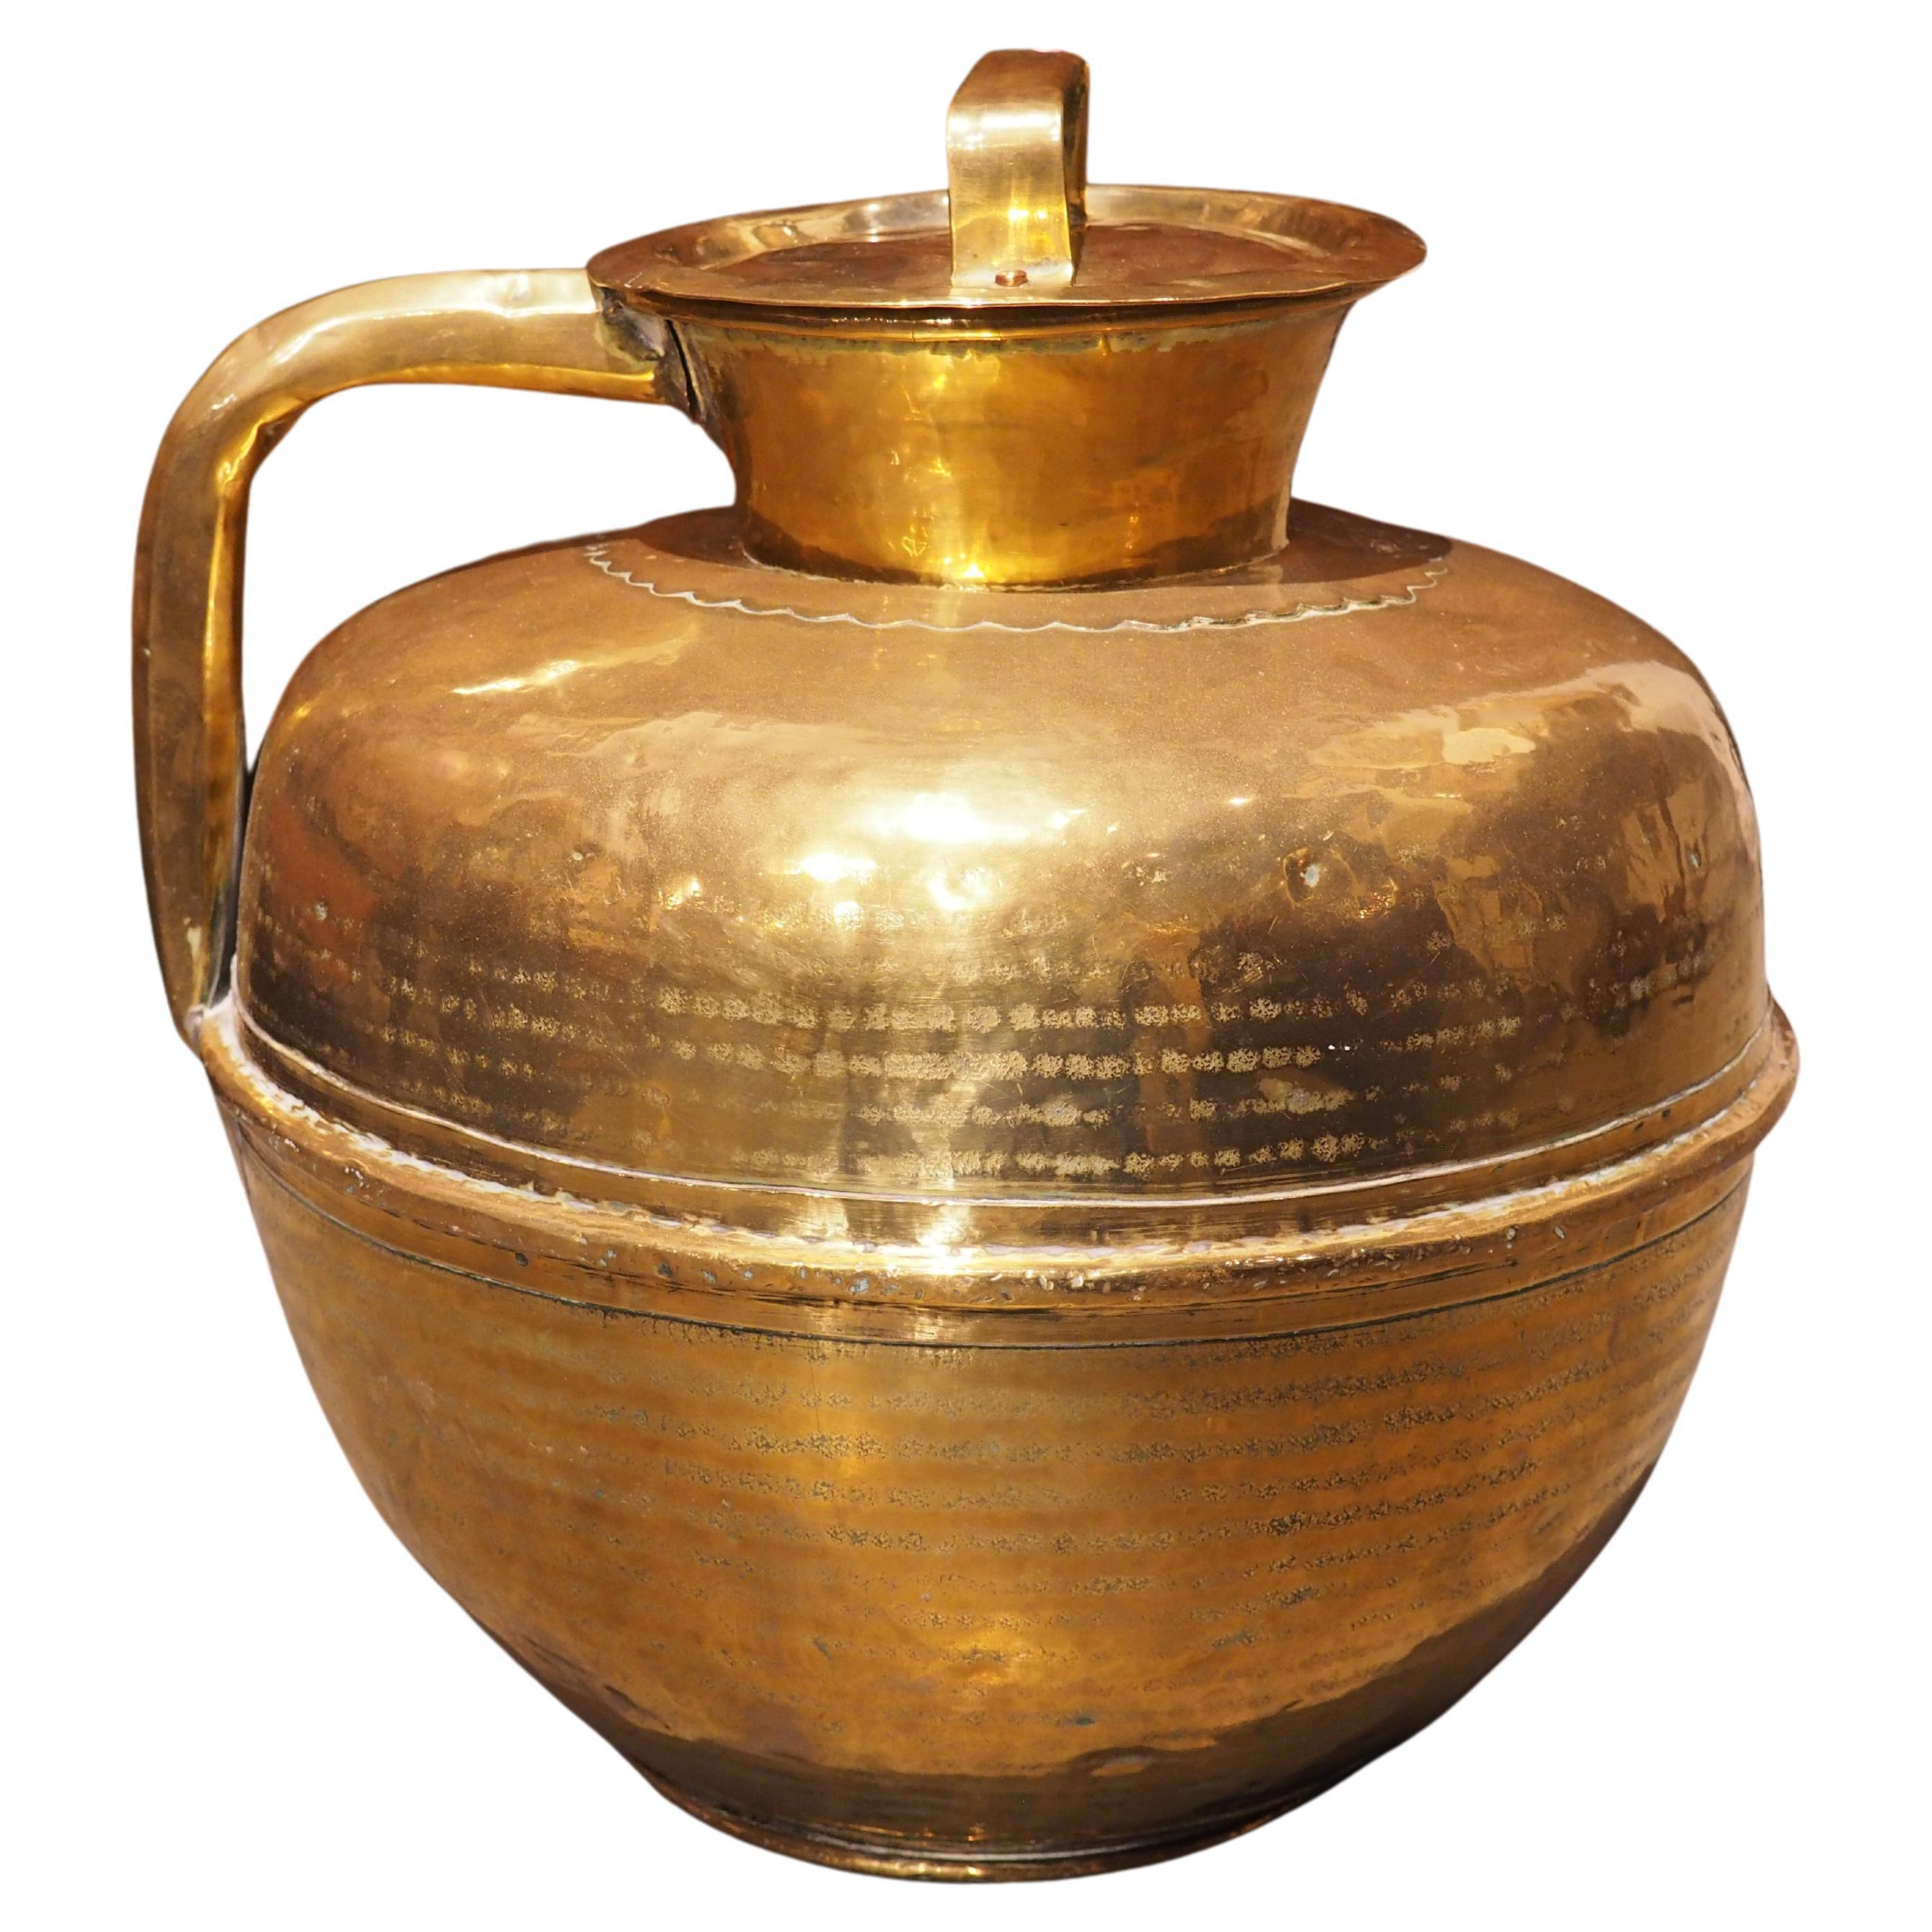 Antique Polished French Brass Milk Jug from Normandy, Circa 1850